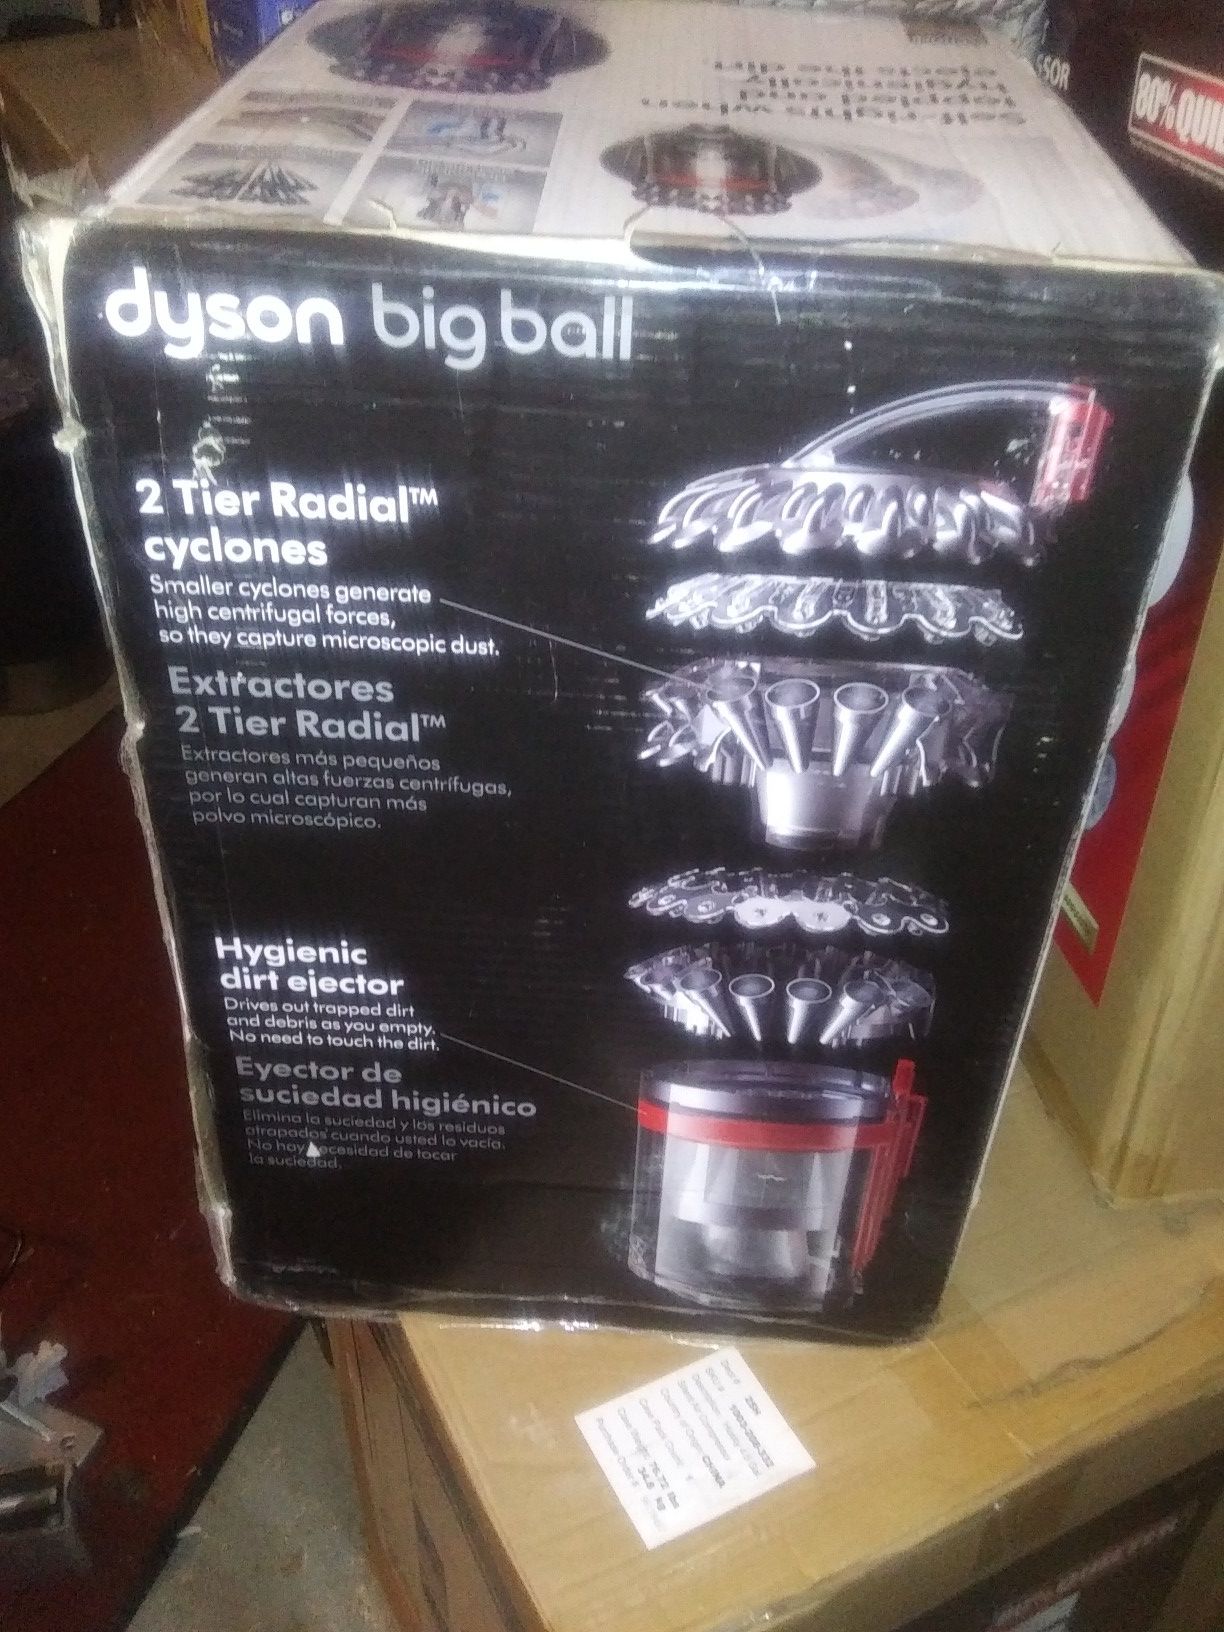 This is the Dyson big ball vacuum new